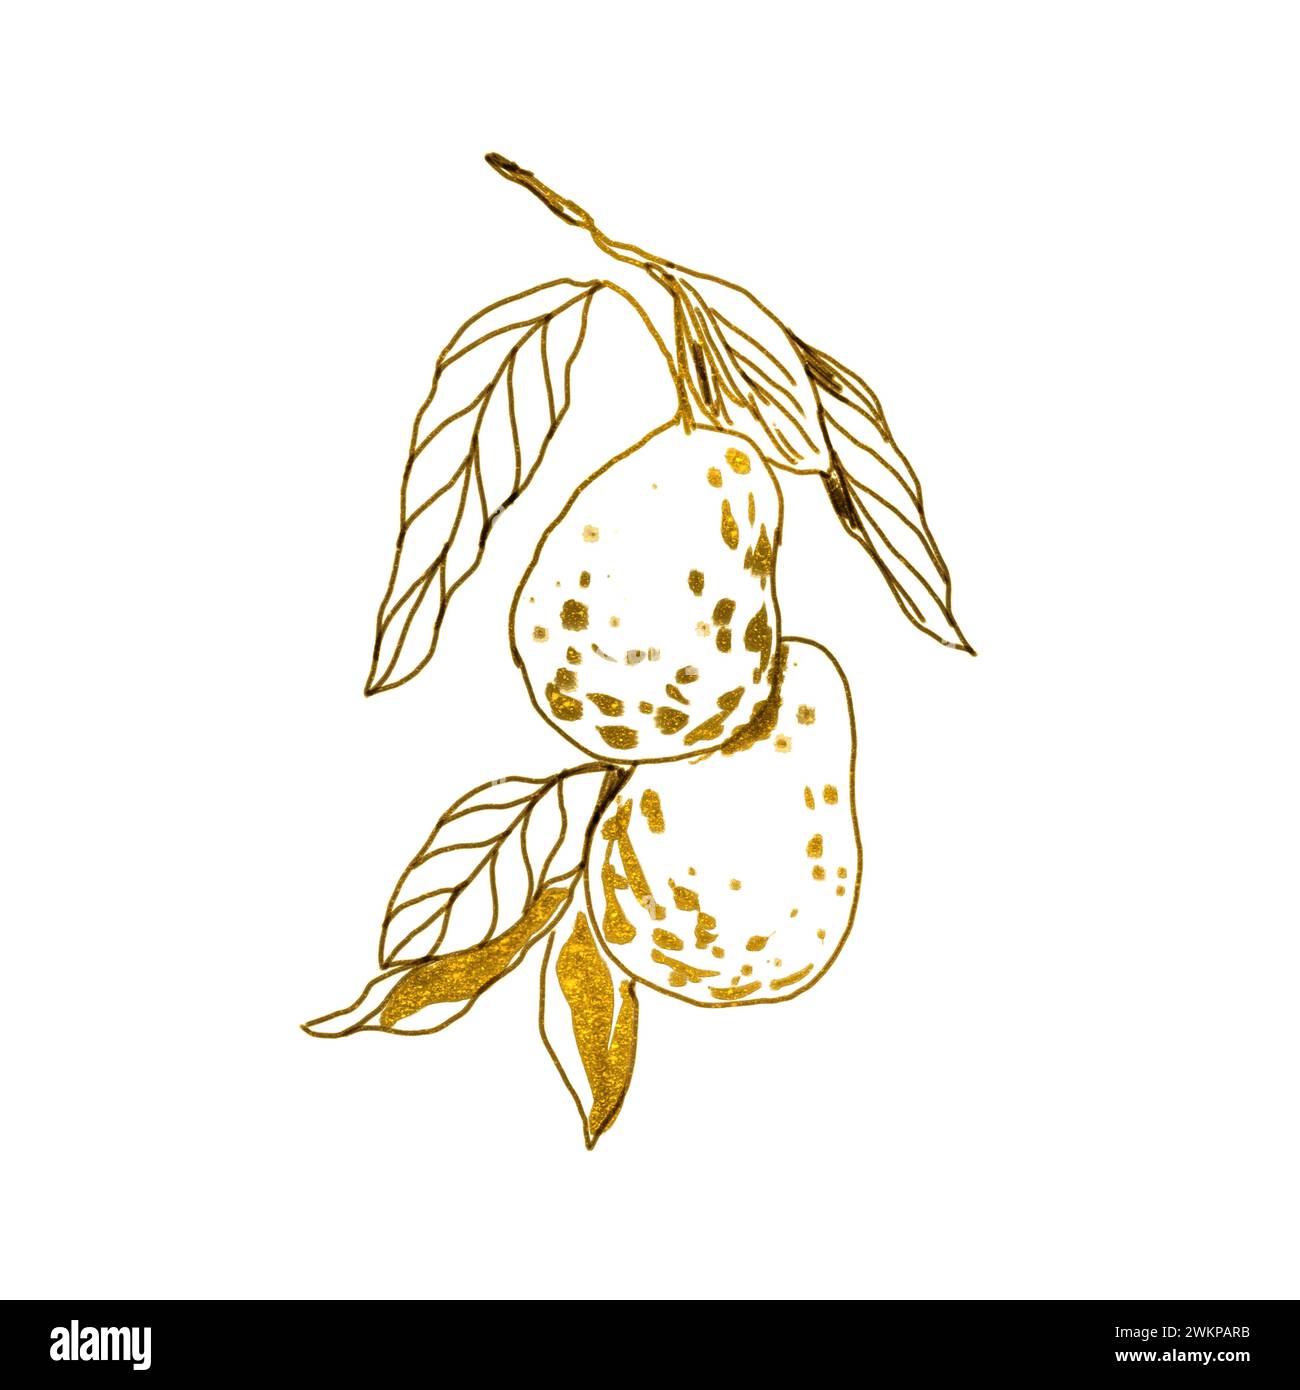 Avocado sprig, golden. Graphic illustration isolated on white background. Element for cards, wedding invitations, labels, covers, posters. Stock Photo